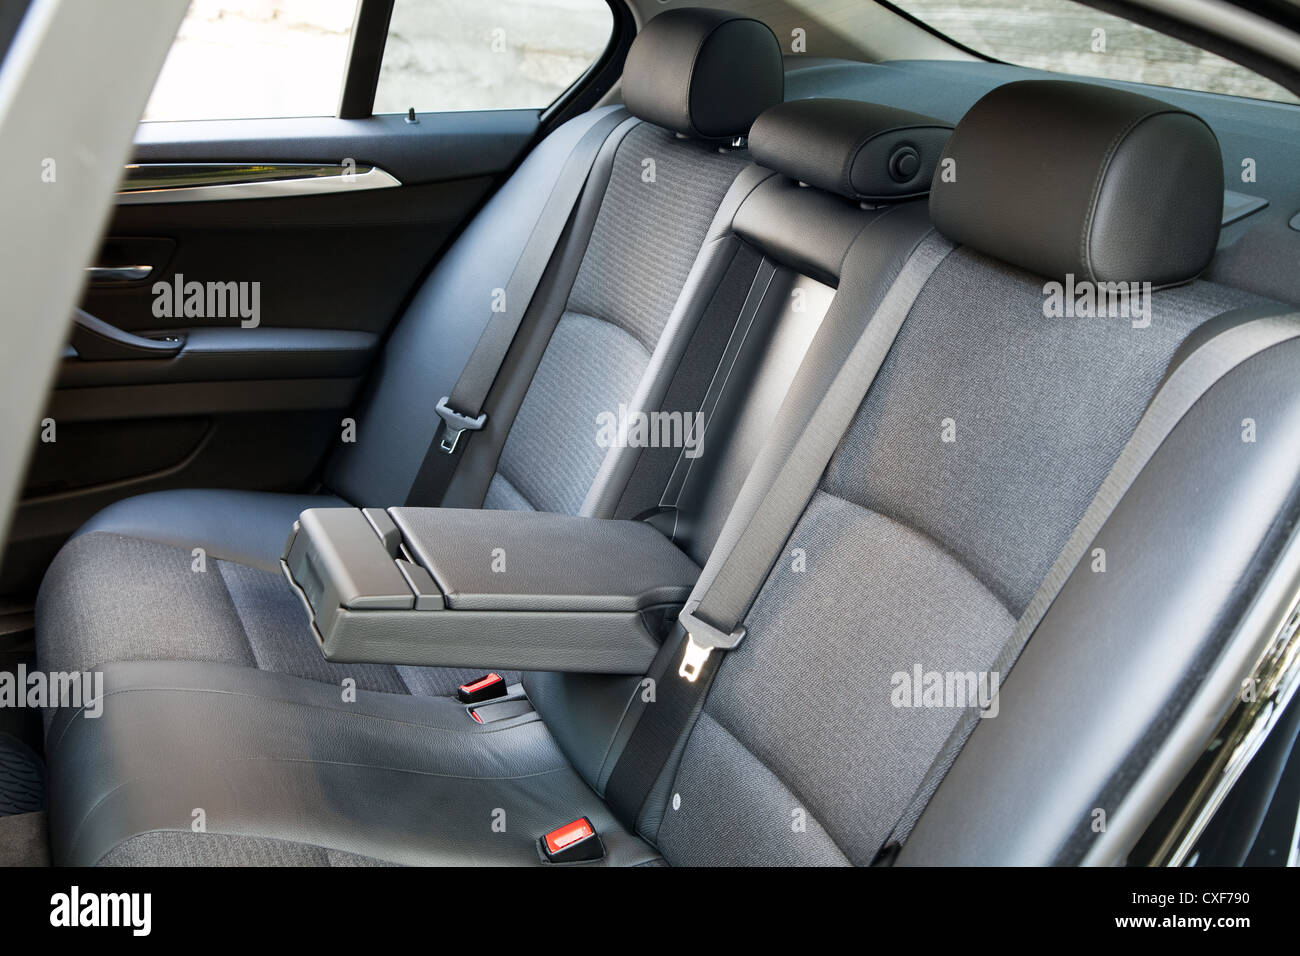 Back passenger car seats in a luxury car Stock Photo